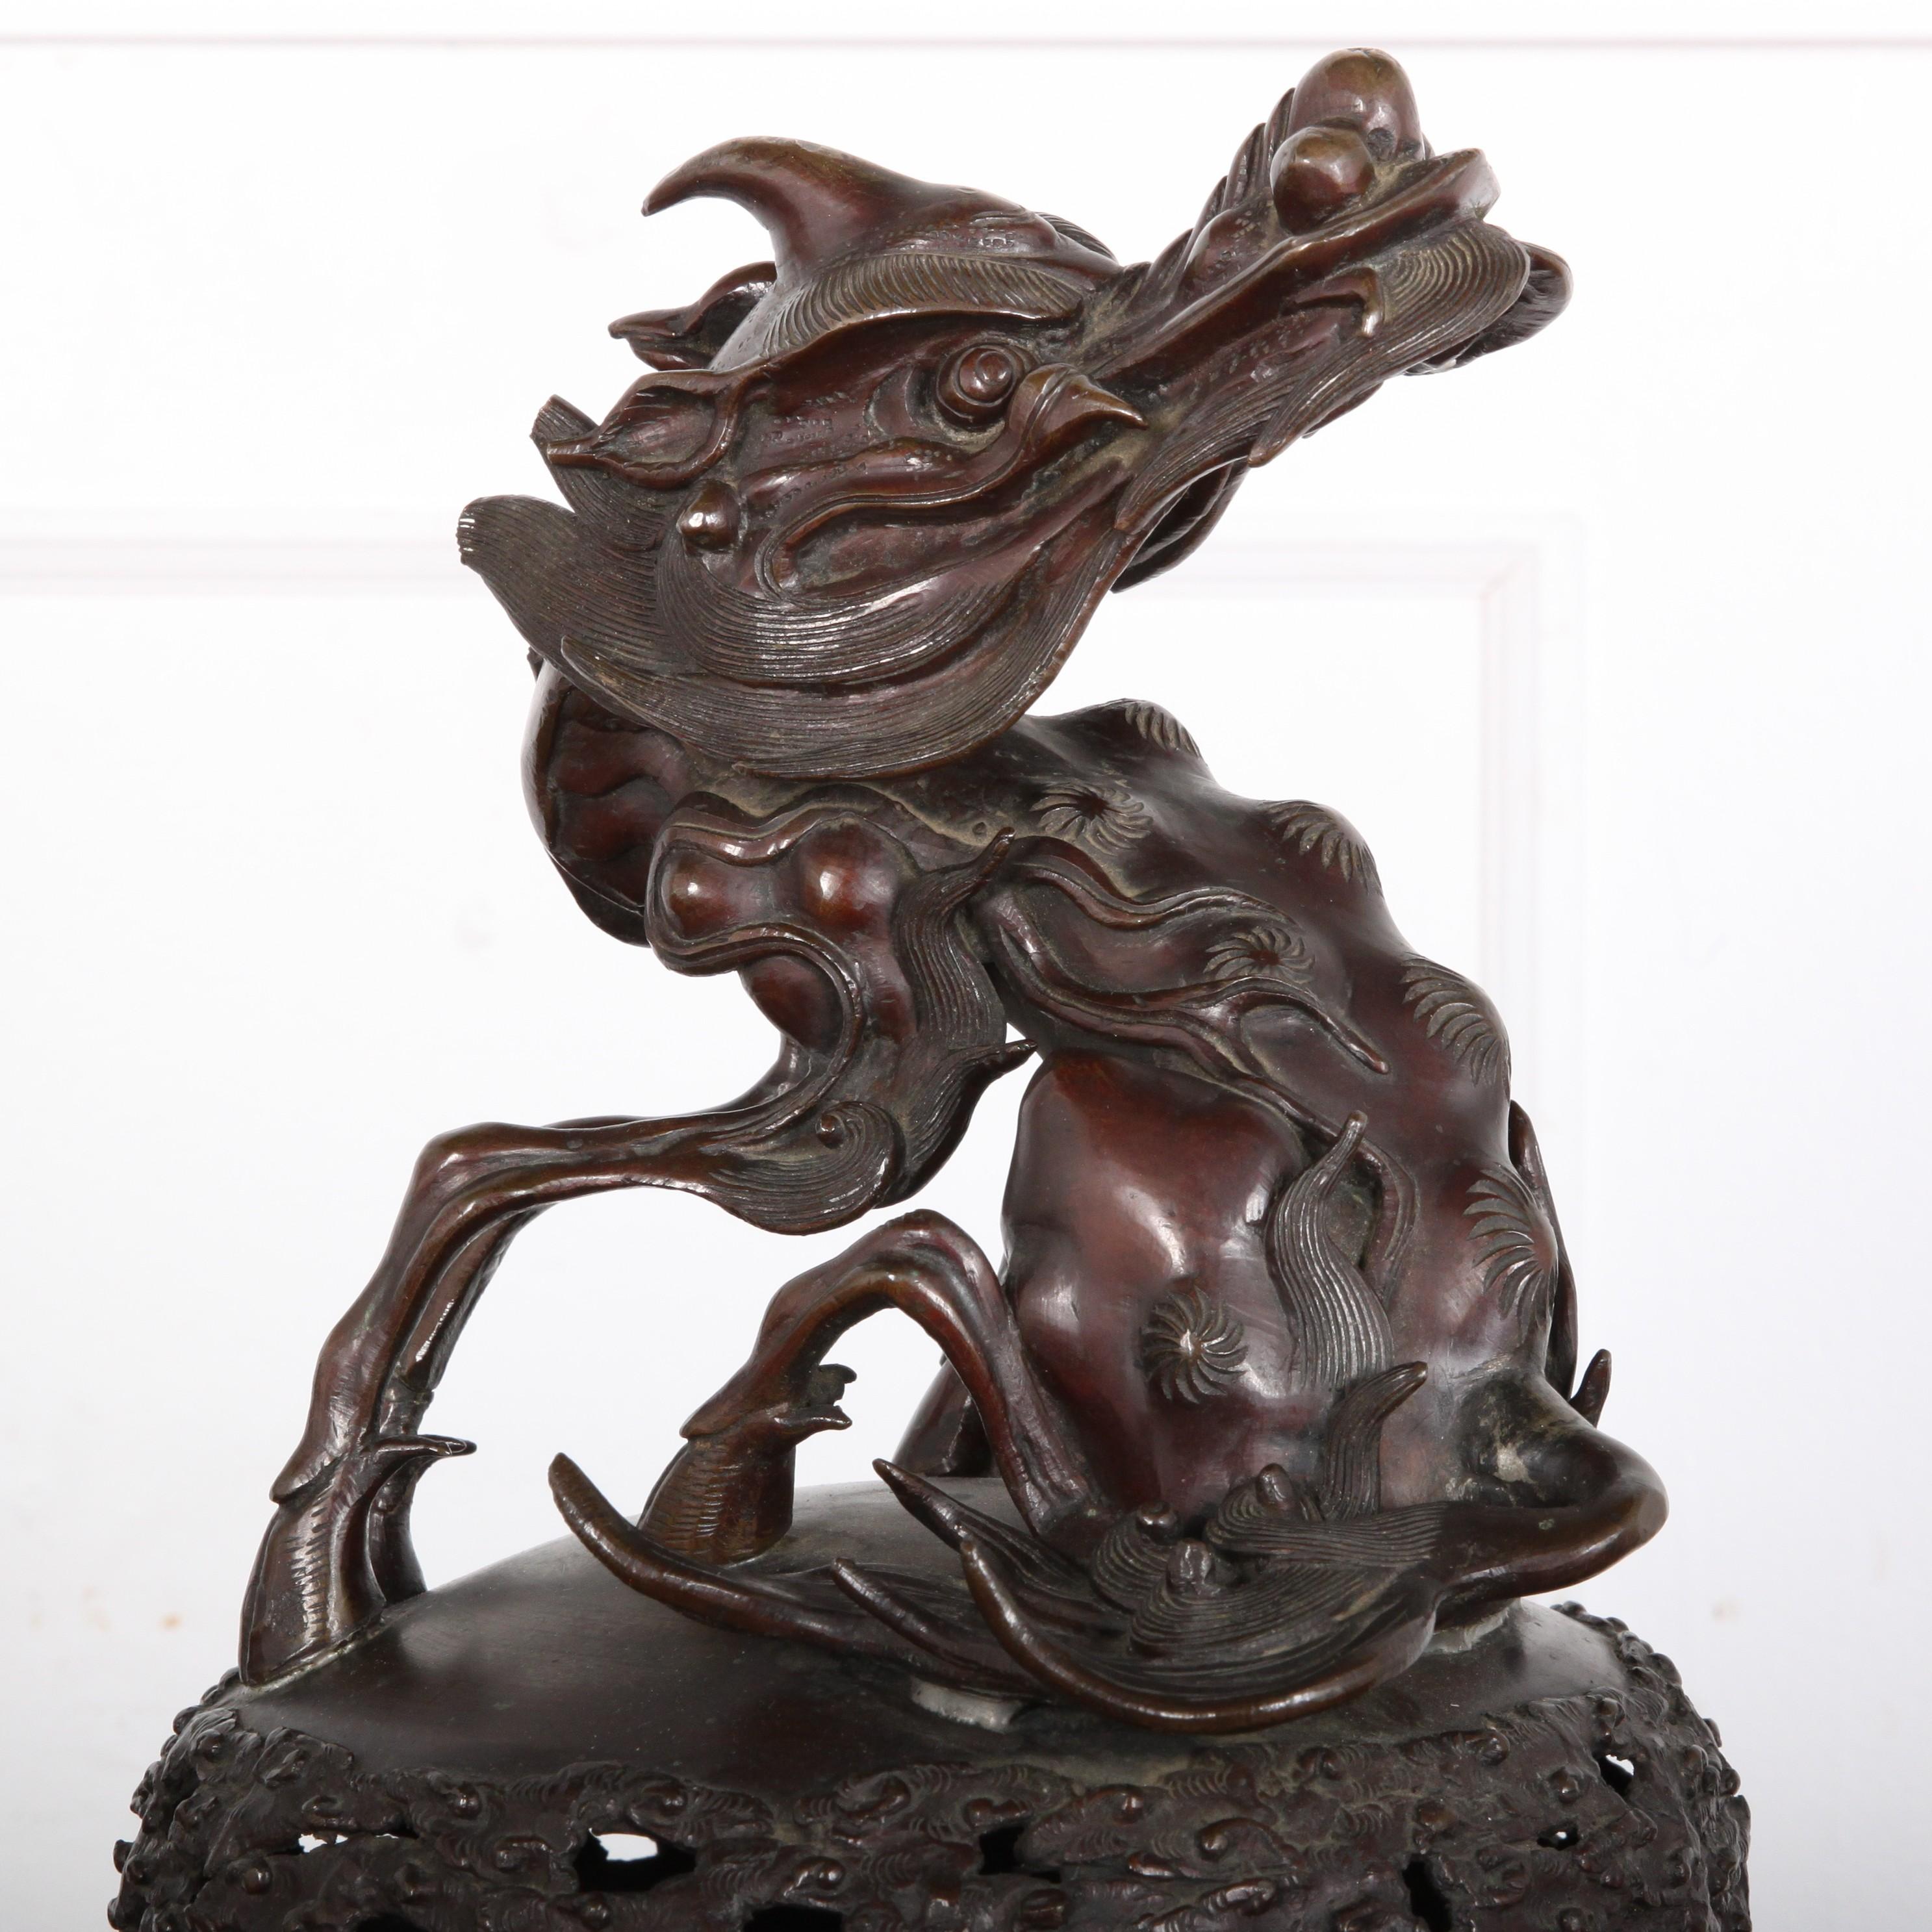 An unusually-large solid bronze Japanese censer or incense burner, the body raised up on a three-legged base and with phoenix and humming bird details. The top features a highly-detailed and dramatic Kirin figure.